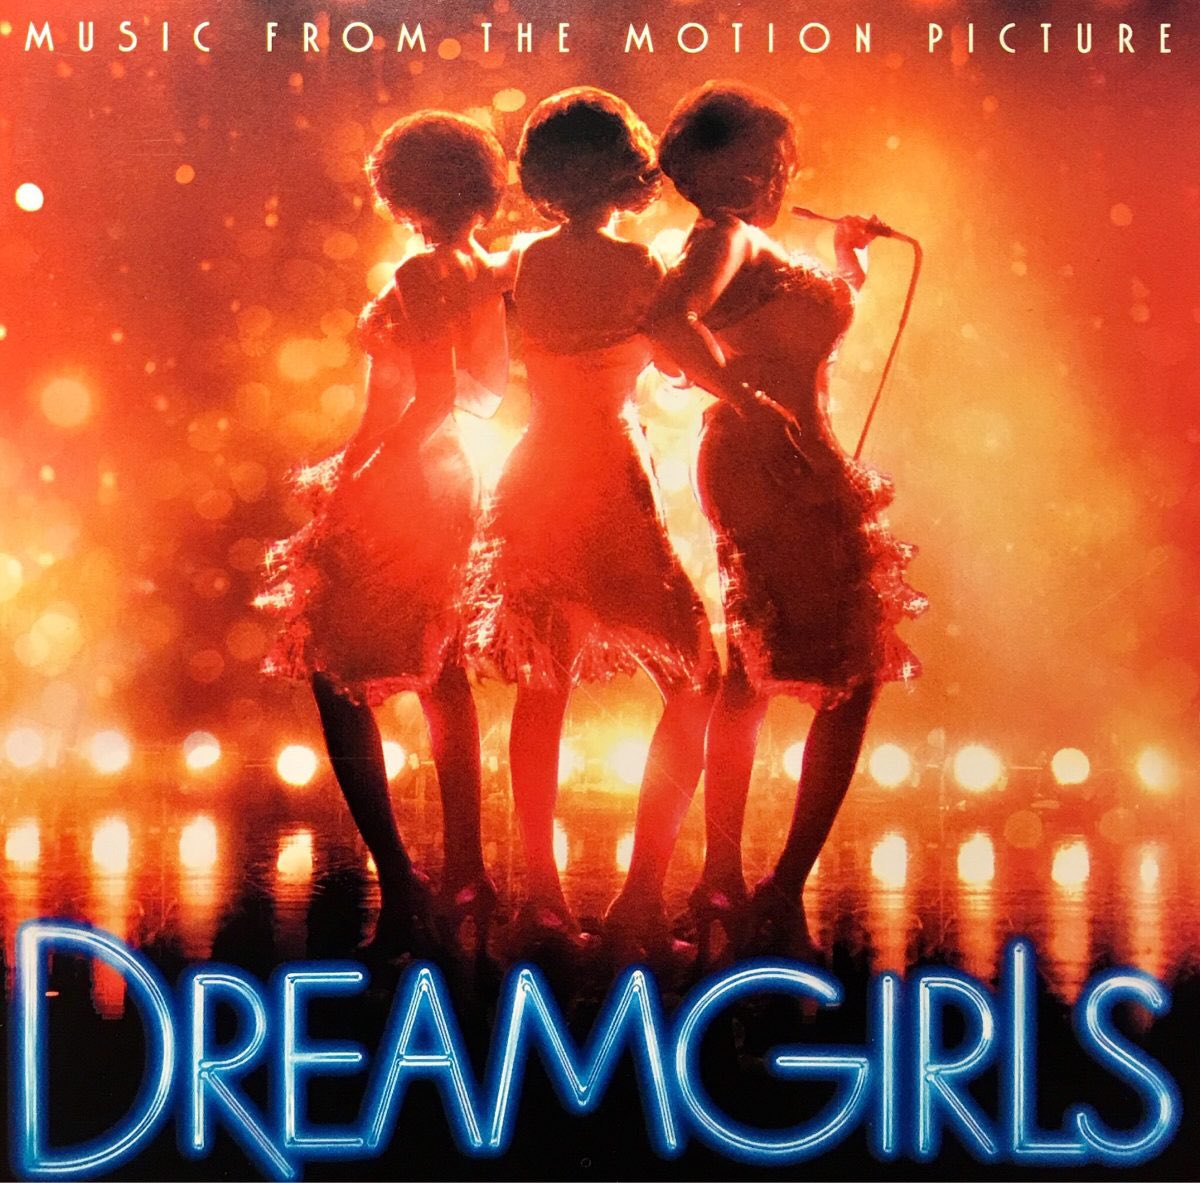 Dreamgirls - The Soundtrack